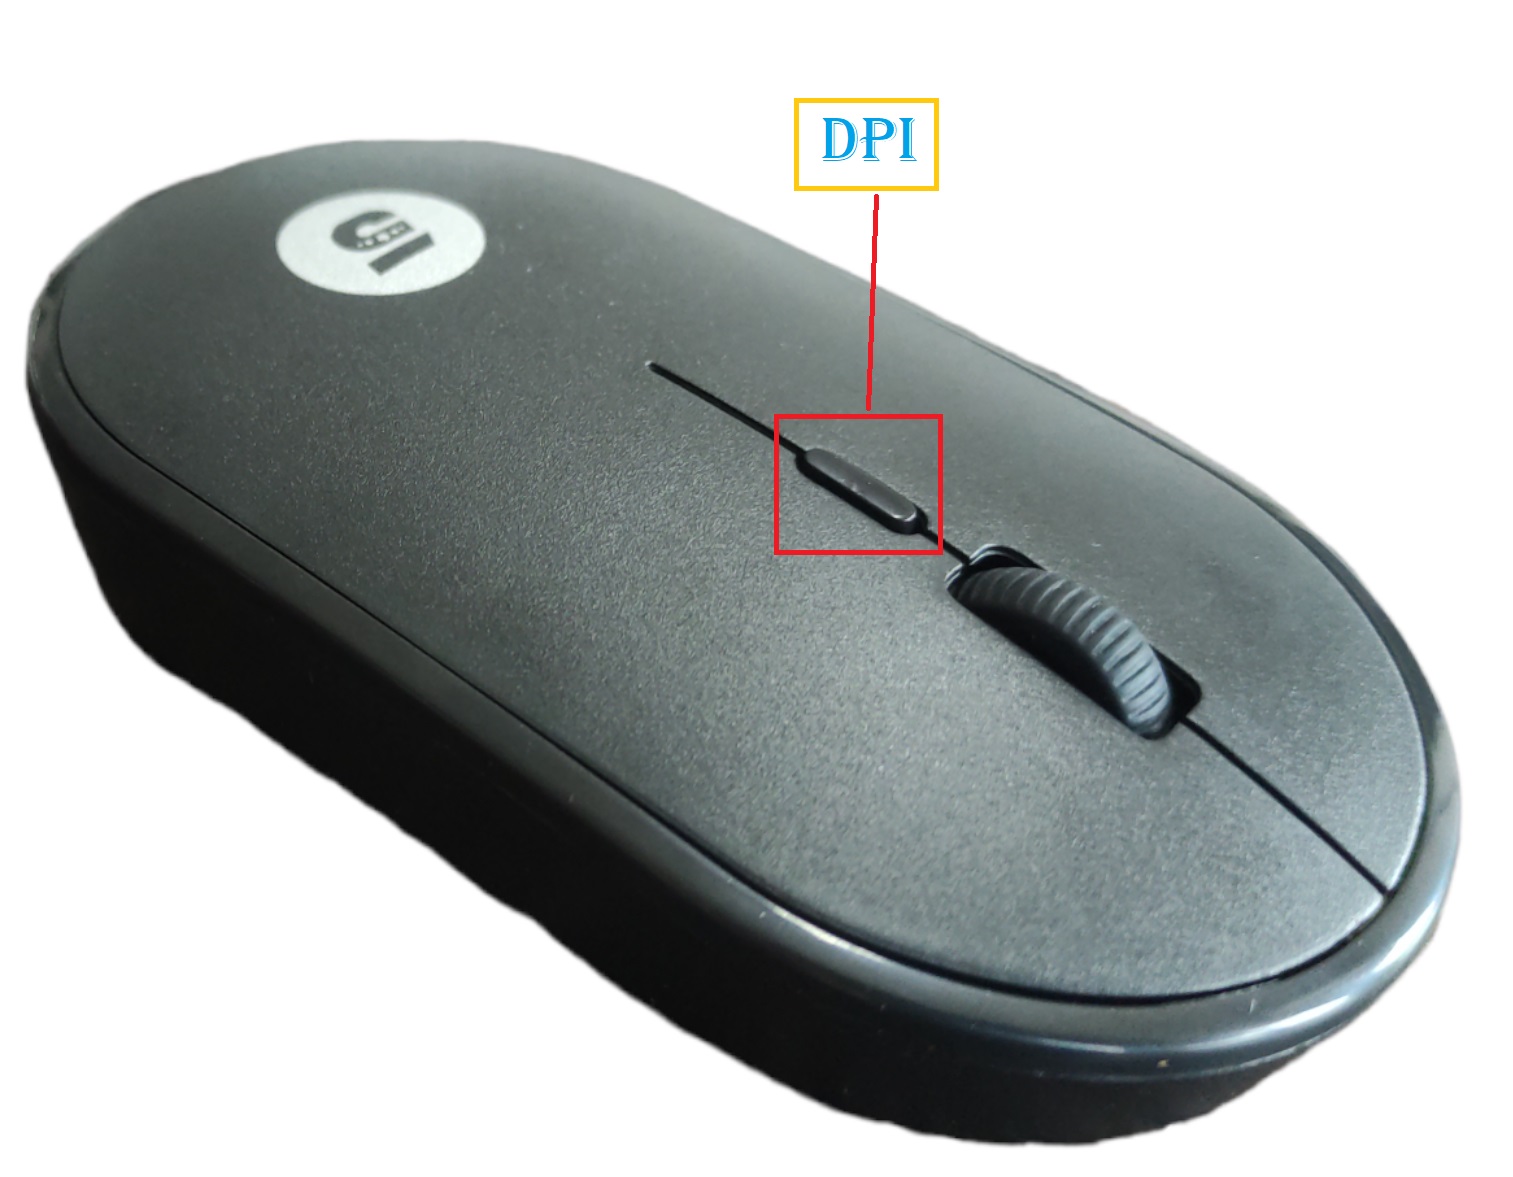 5STAR MSW200 MOUSE